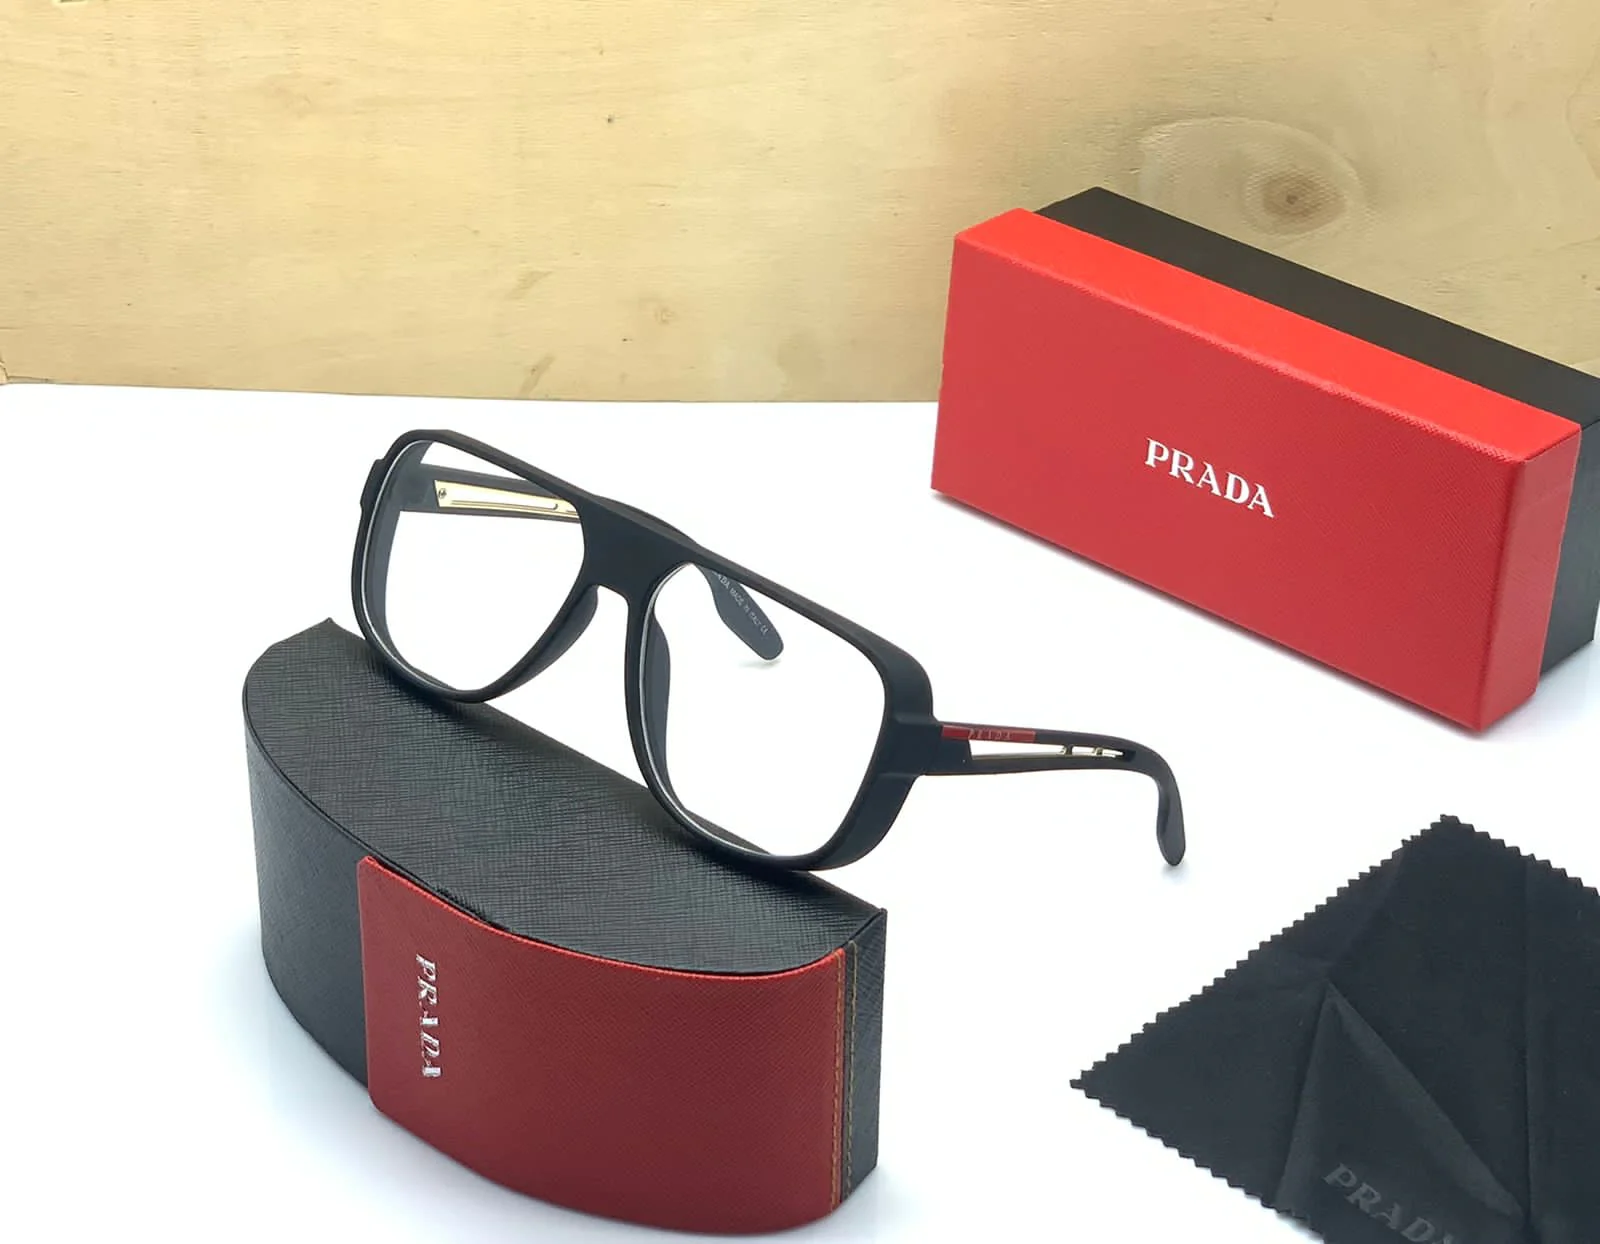 Why Do You Need Prada Sunglasses for Your Next Vacation?